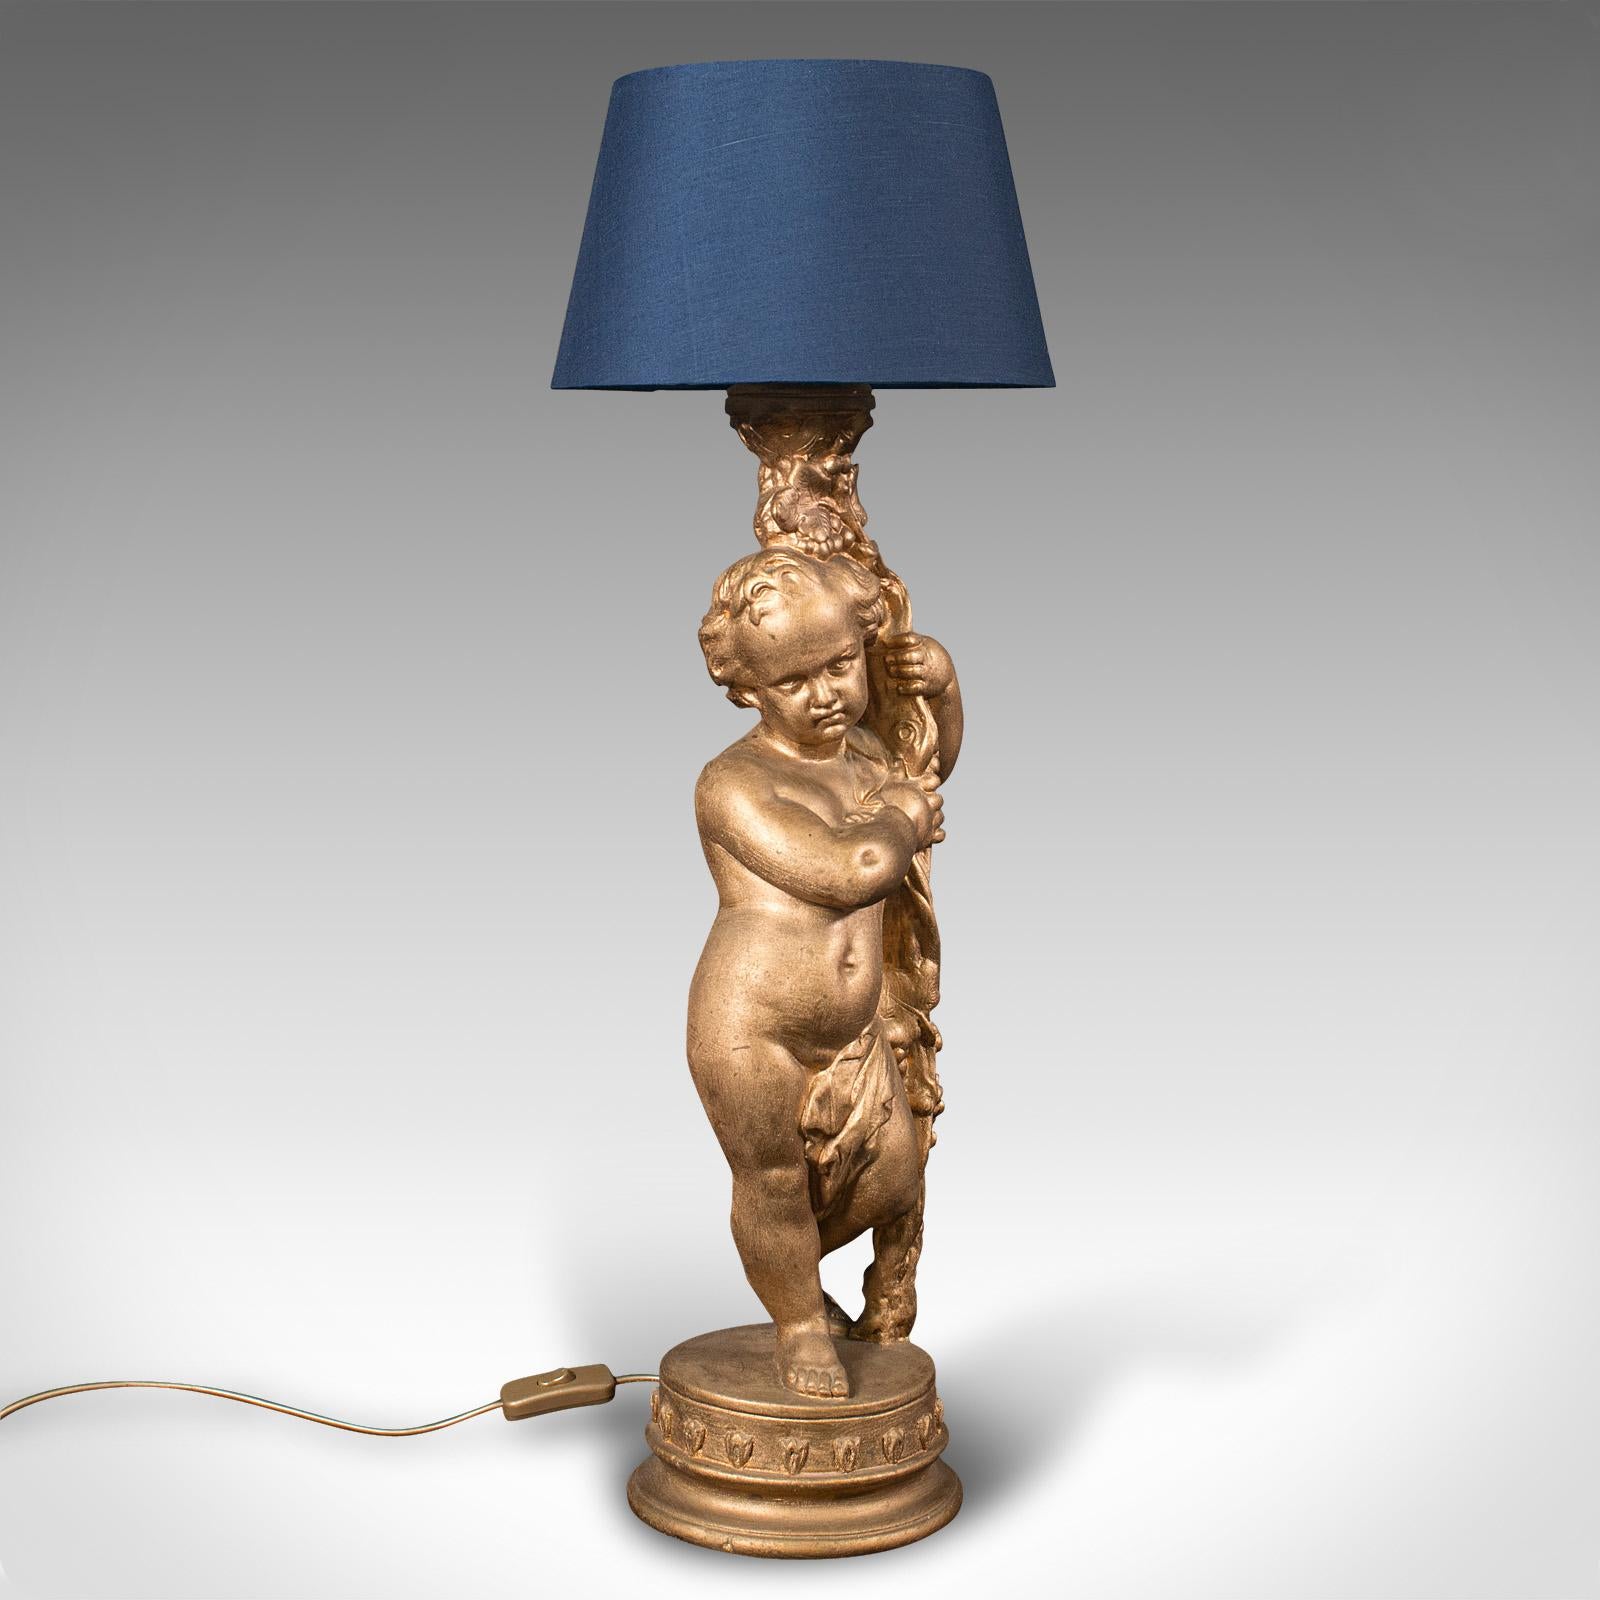 This is a vintage ornamental putto lamp. An English, plaster decorative cherub table light, dating to the late 20th century, circa 1970.

Exquisite tonality with classical Italianate taste
Displays a desirable aged patina and in good